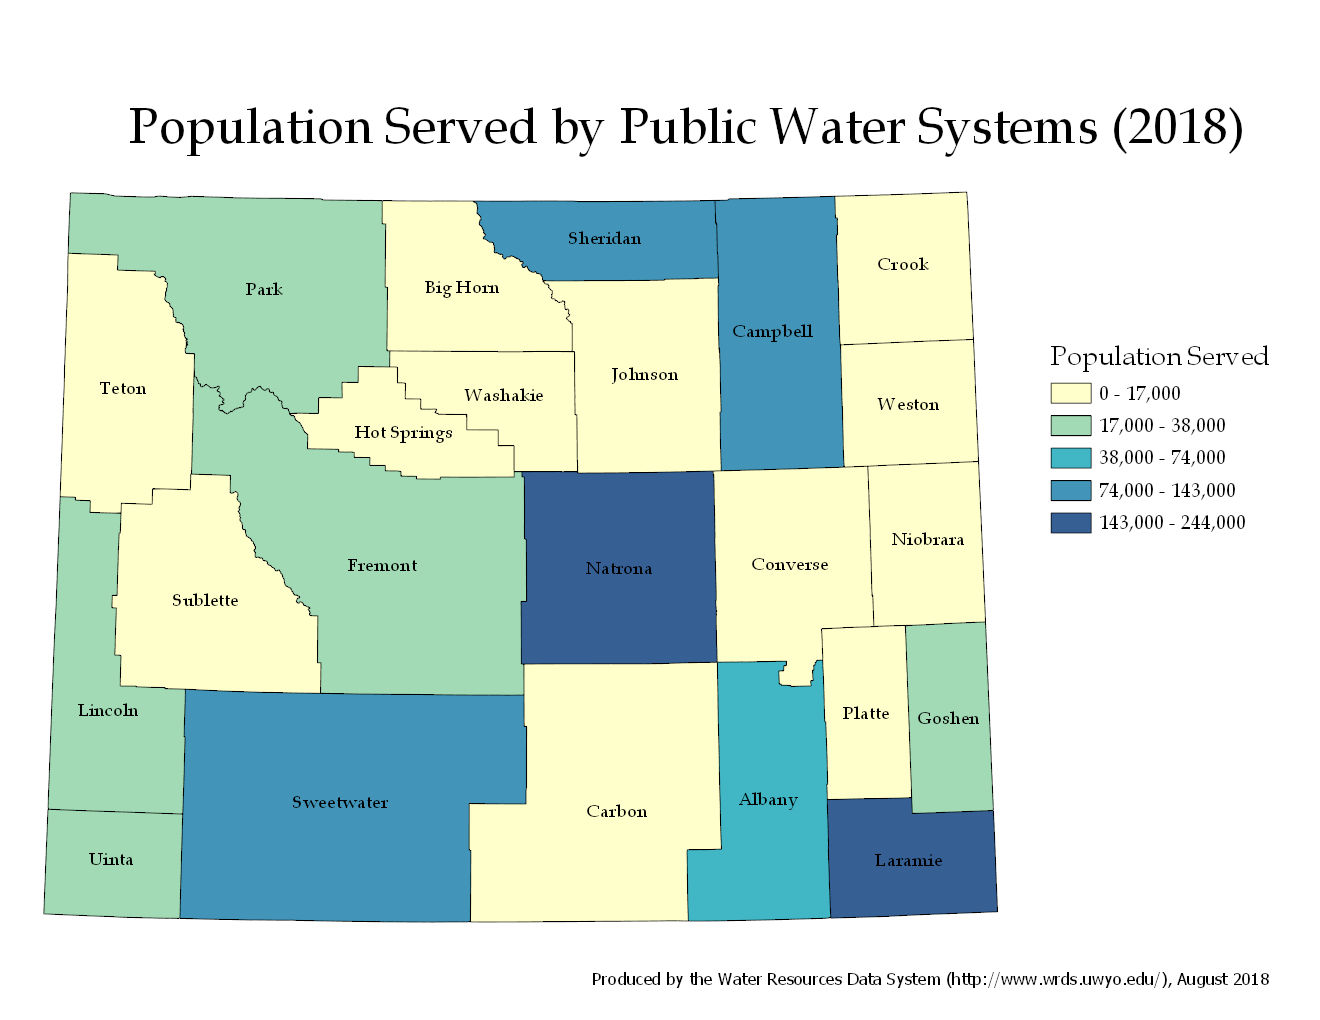 Population served by Wyoming Public Water Systems (2016)